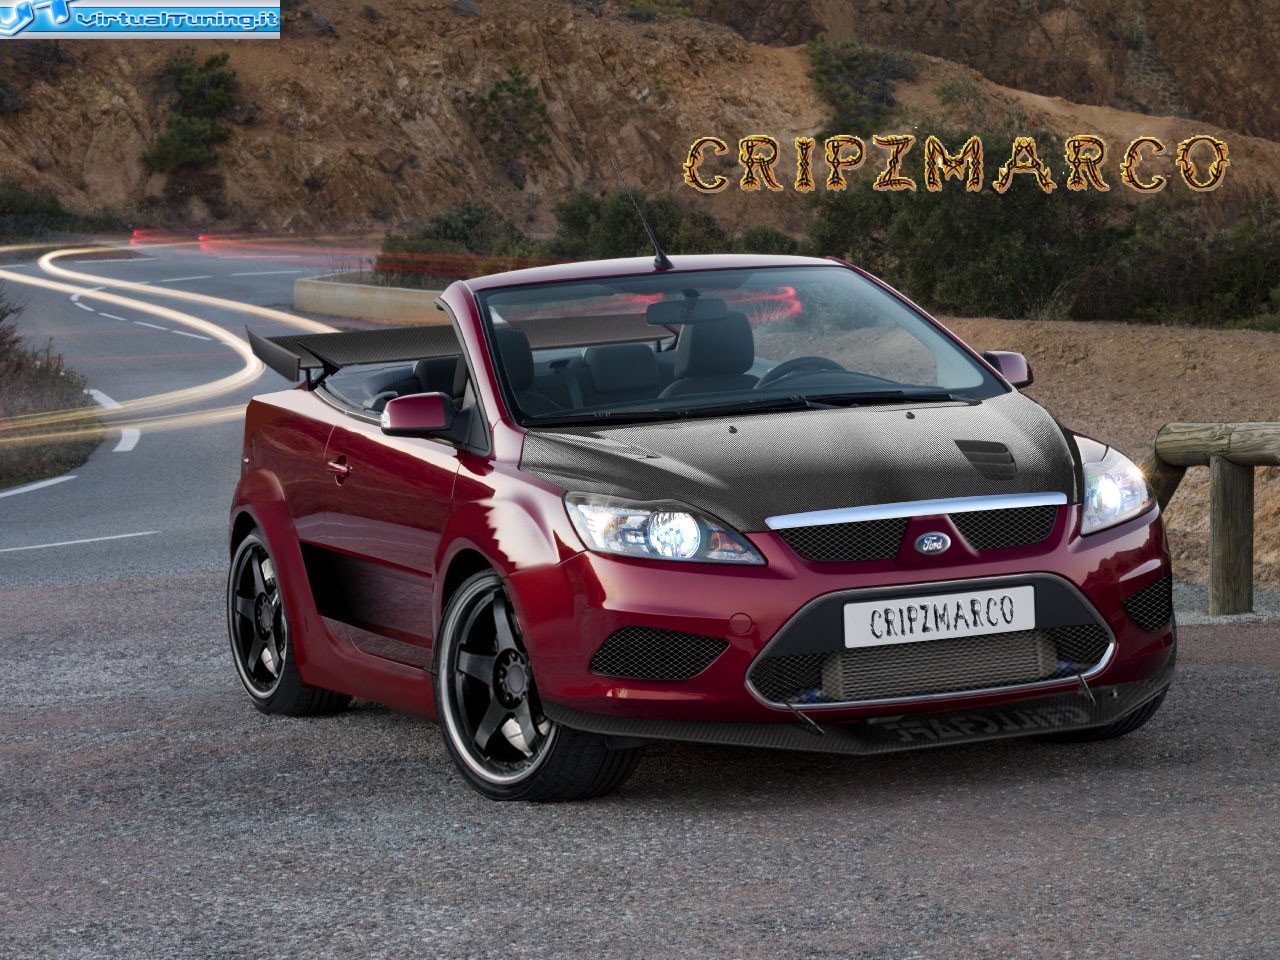 VirtualTuning FORD Focus CoupèCabriolet 2008 by CripzMarco